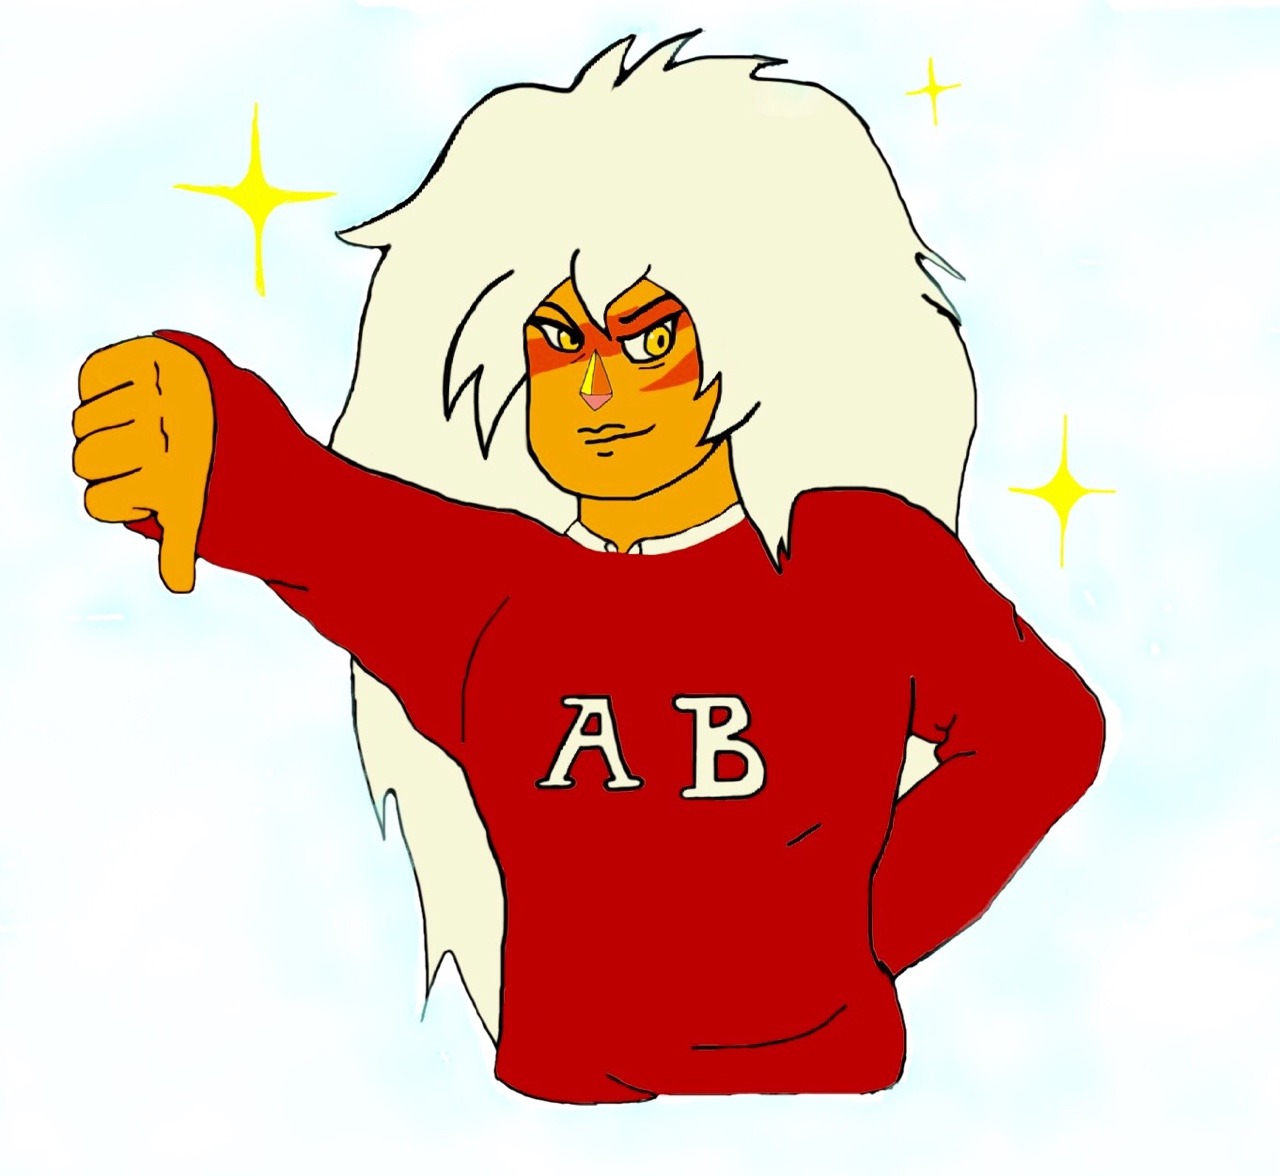 -ALPHA BETA- A messy Jasp inspired by the movie “Revenge of the Nerds”